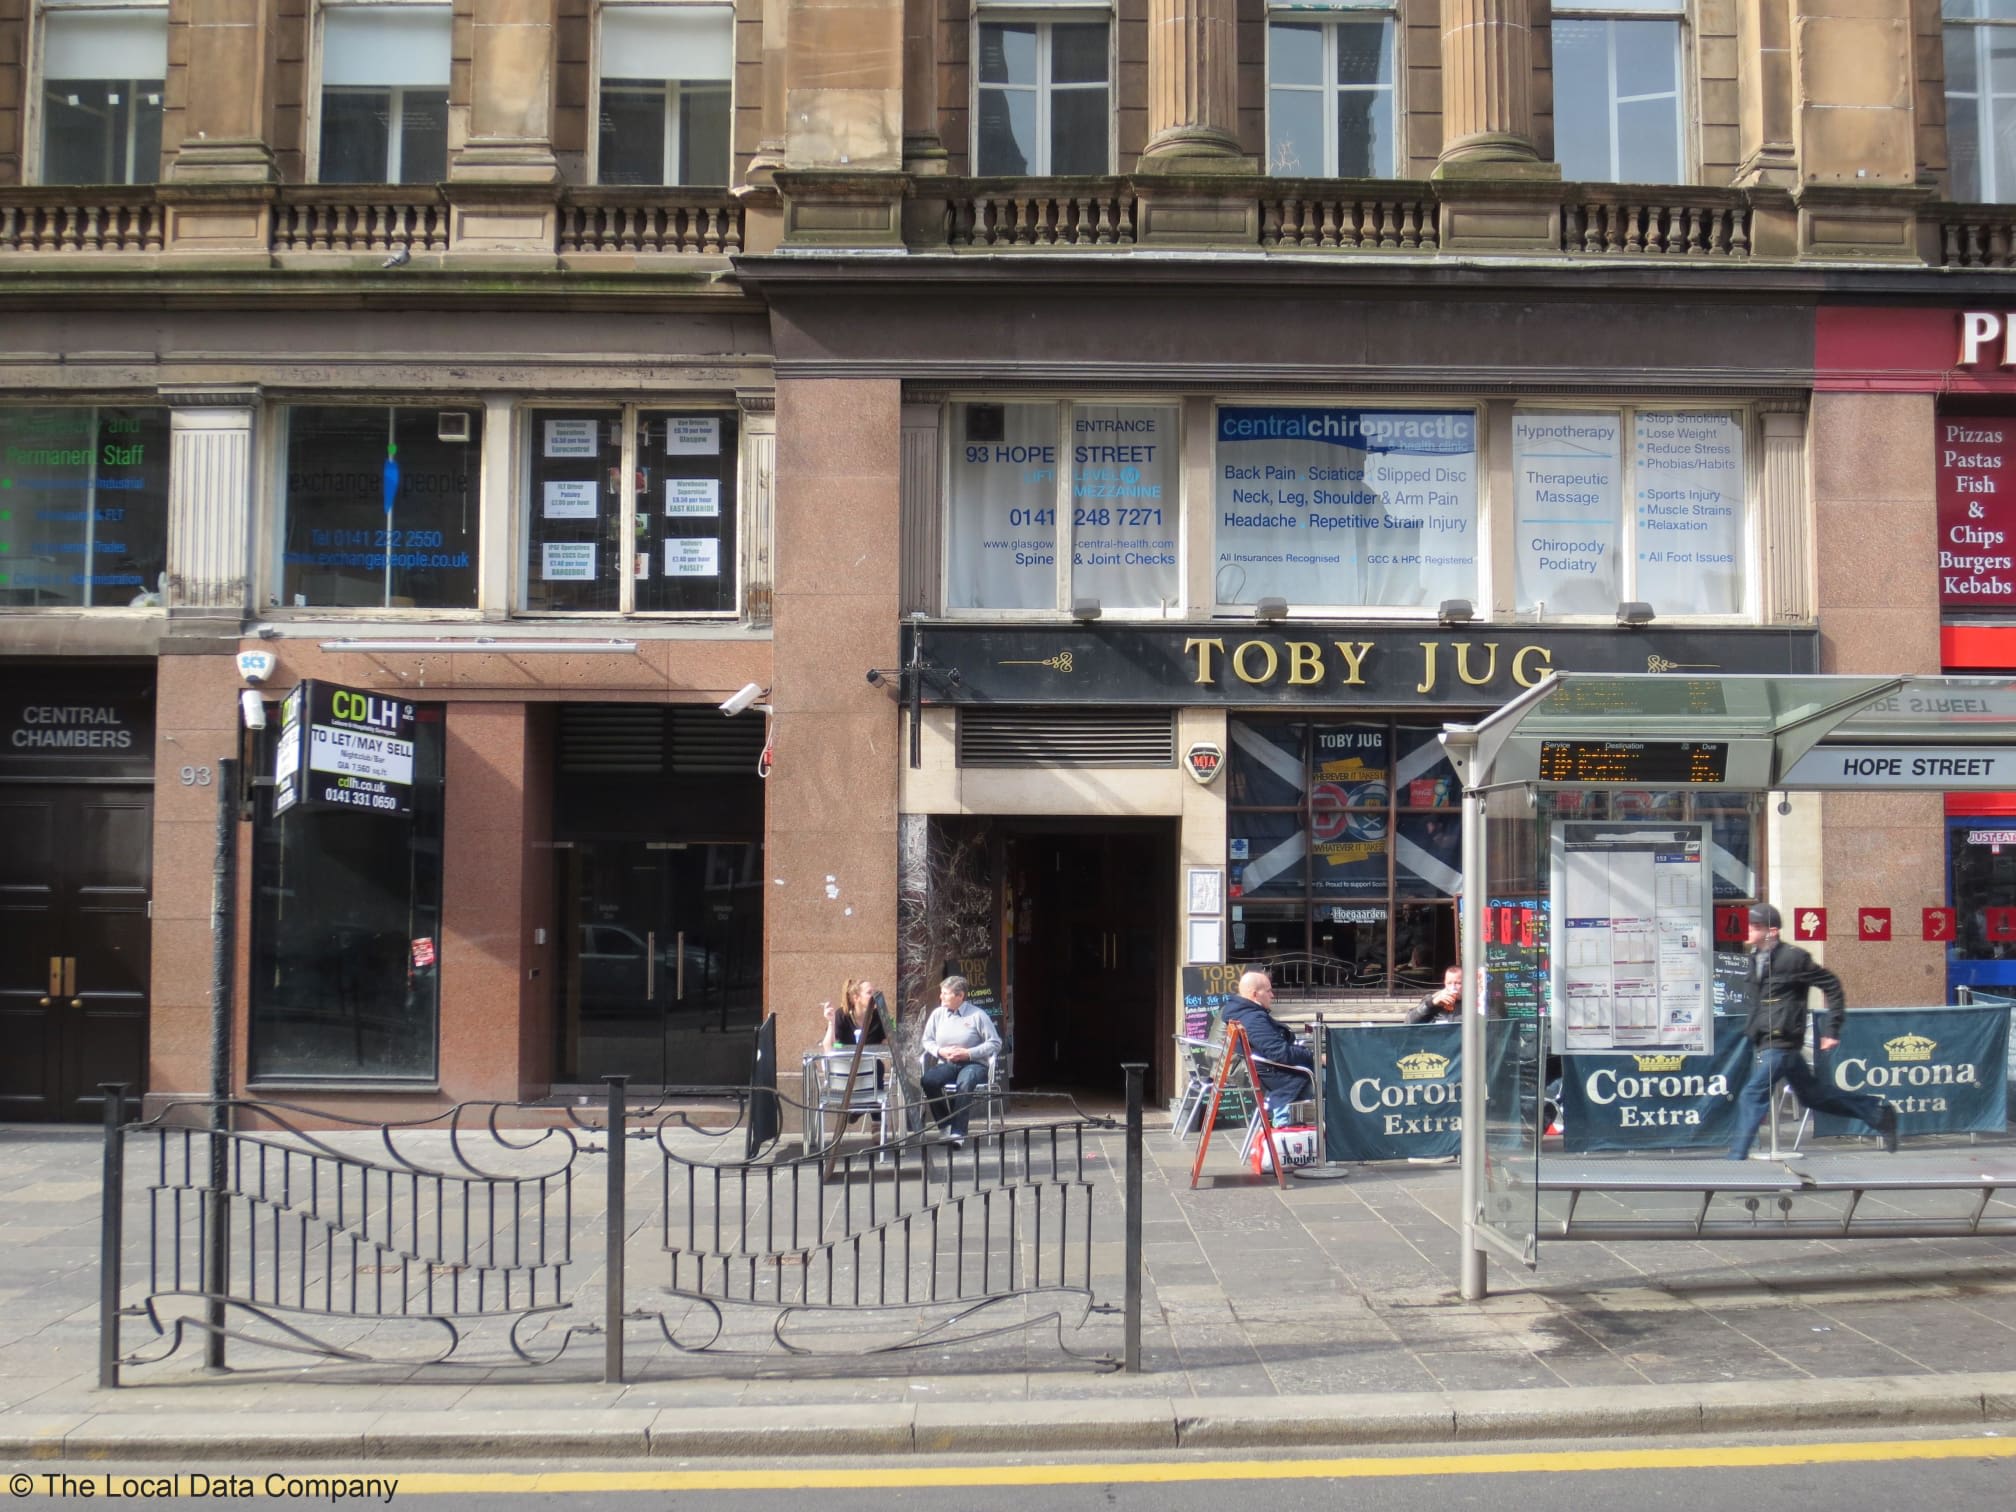 Central Chiropractic & Health Clinic | Central Chambers, 93 Hope Street, Glasgow G2 6LD | +44 141 248 7271